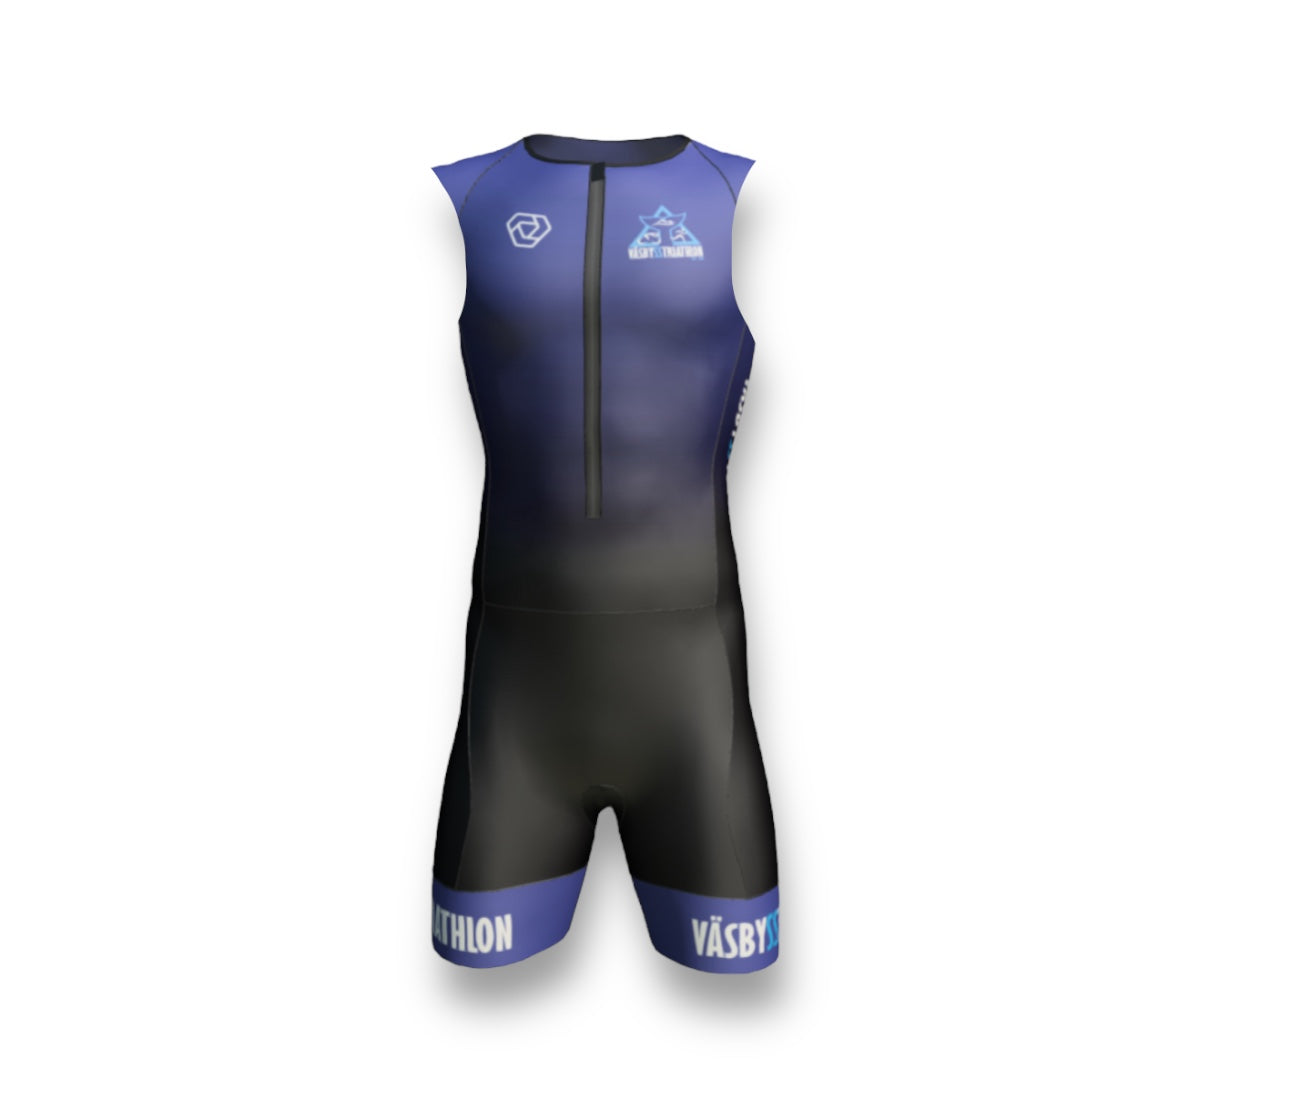 Väsby SS Tri [KIDS] - SPEED 2.0 TRI SUIT NO SLEEVE - FRONT ZIPPER